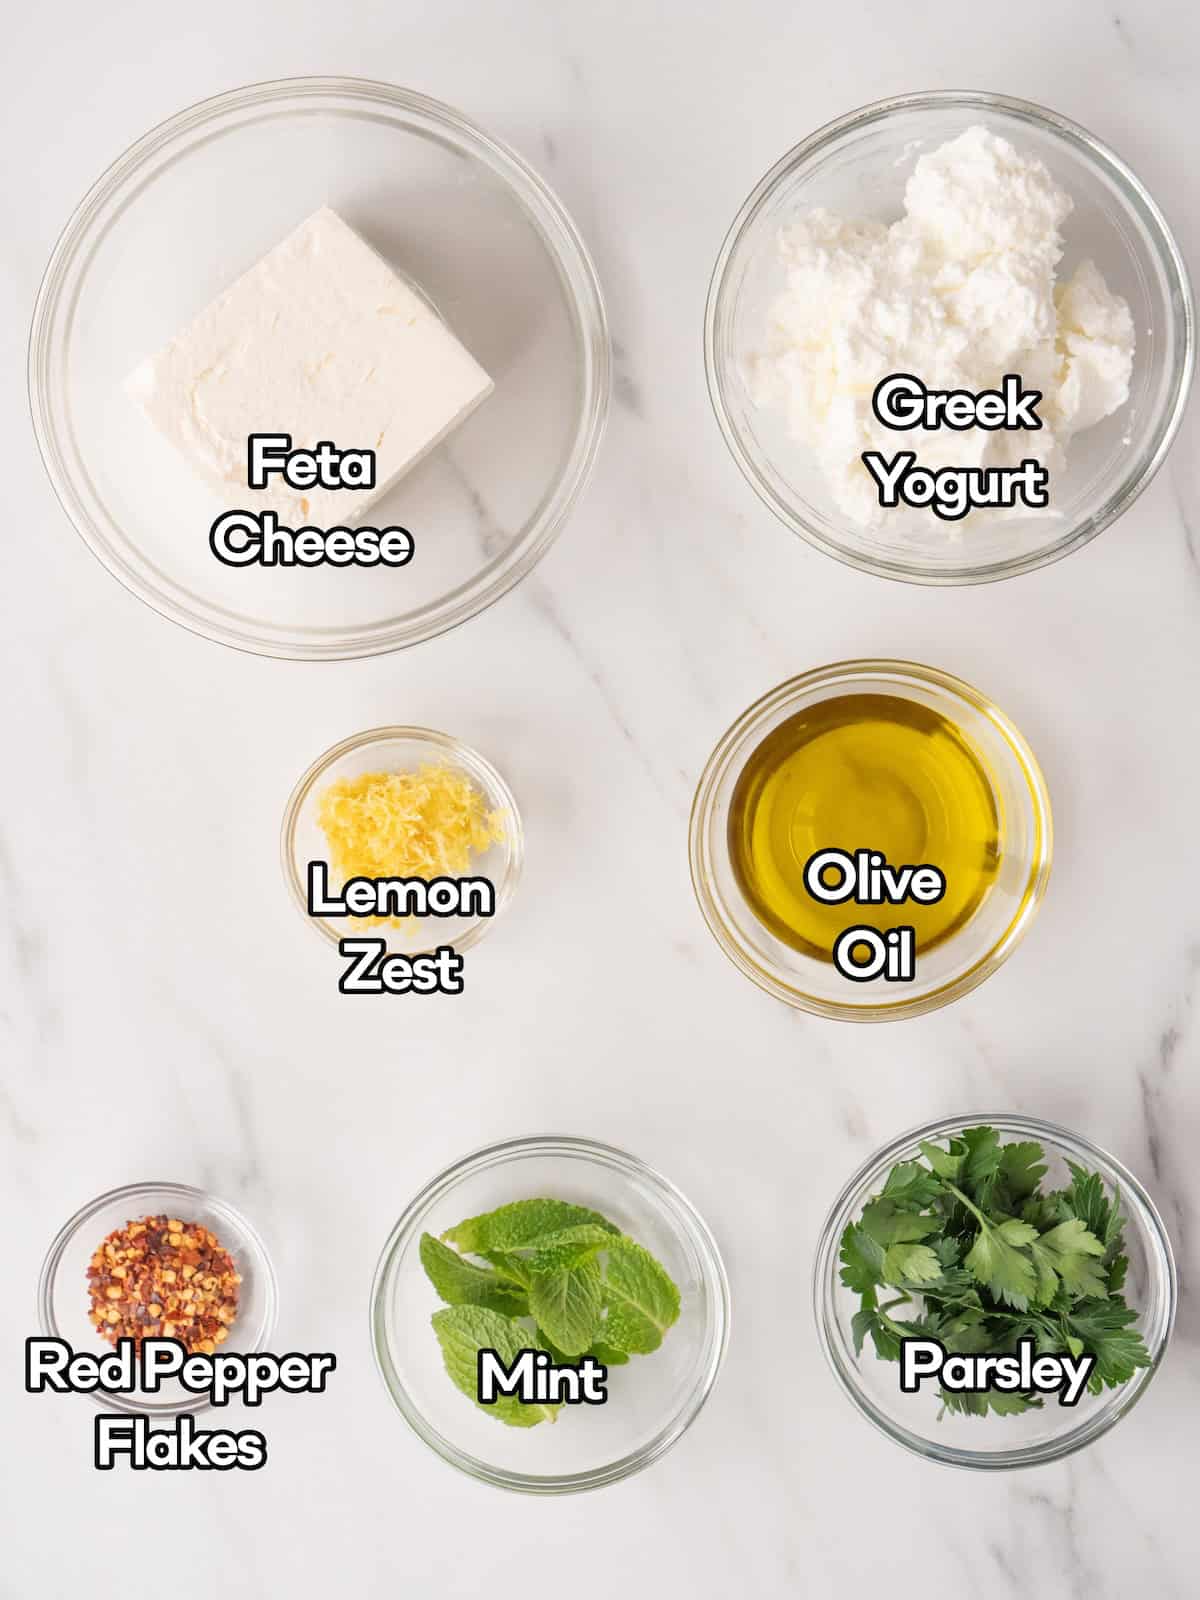 Mise en place of all ingredients to make whipped feta.